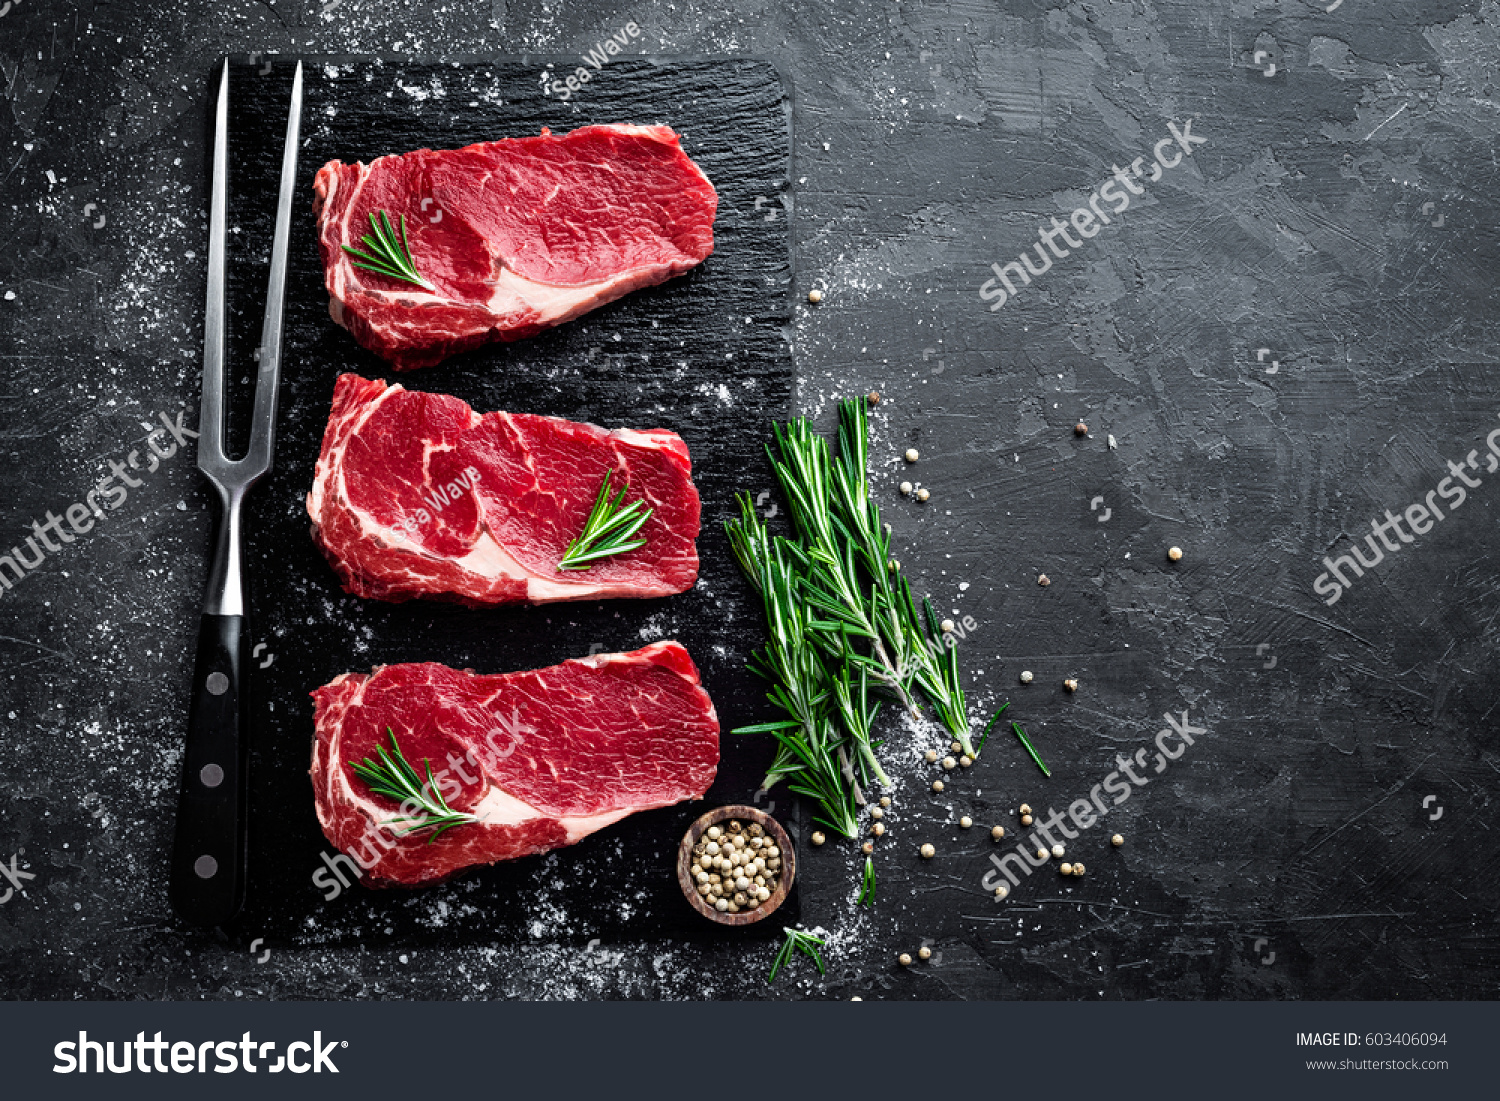 Raw meat, beef steak on black background, top view #603406094